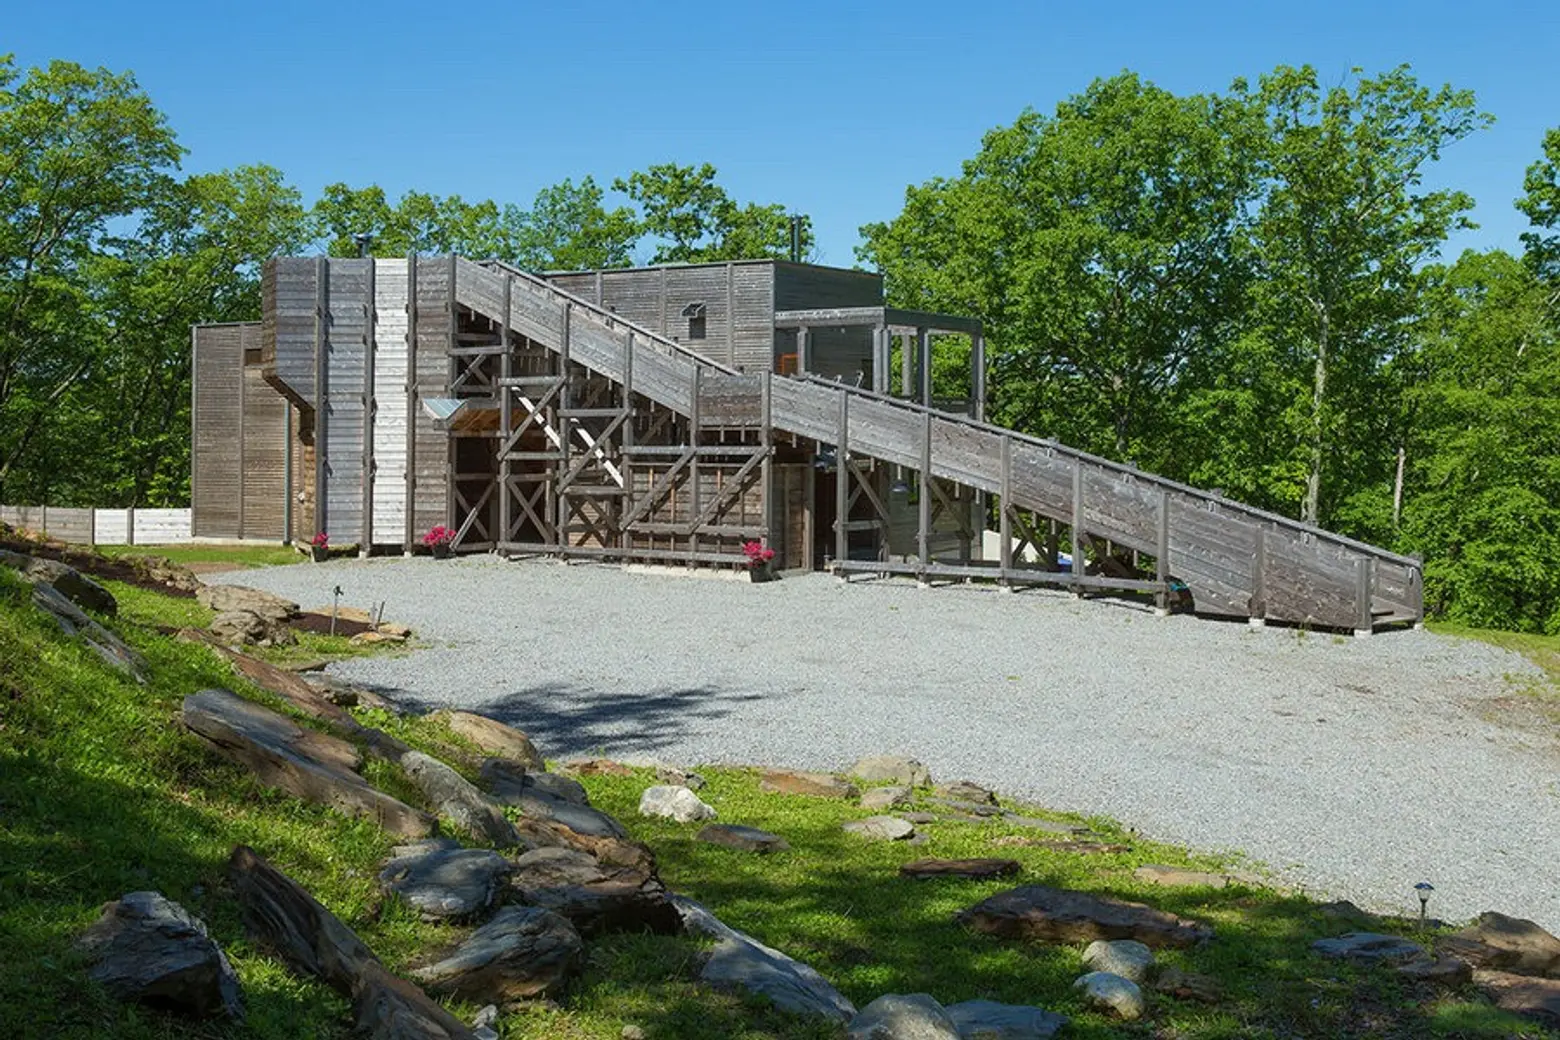 Nature informs modern design in this $6M upstate retreat with Scandinavian and Korean influences